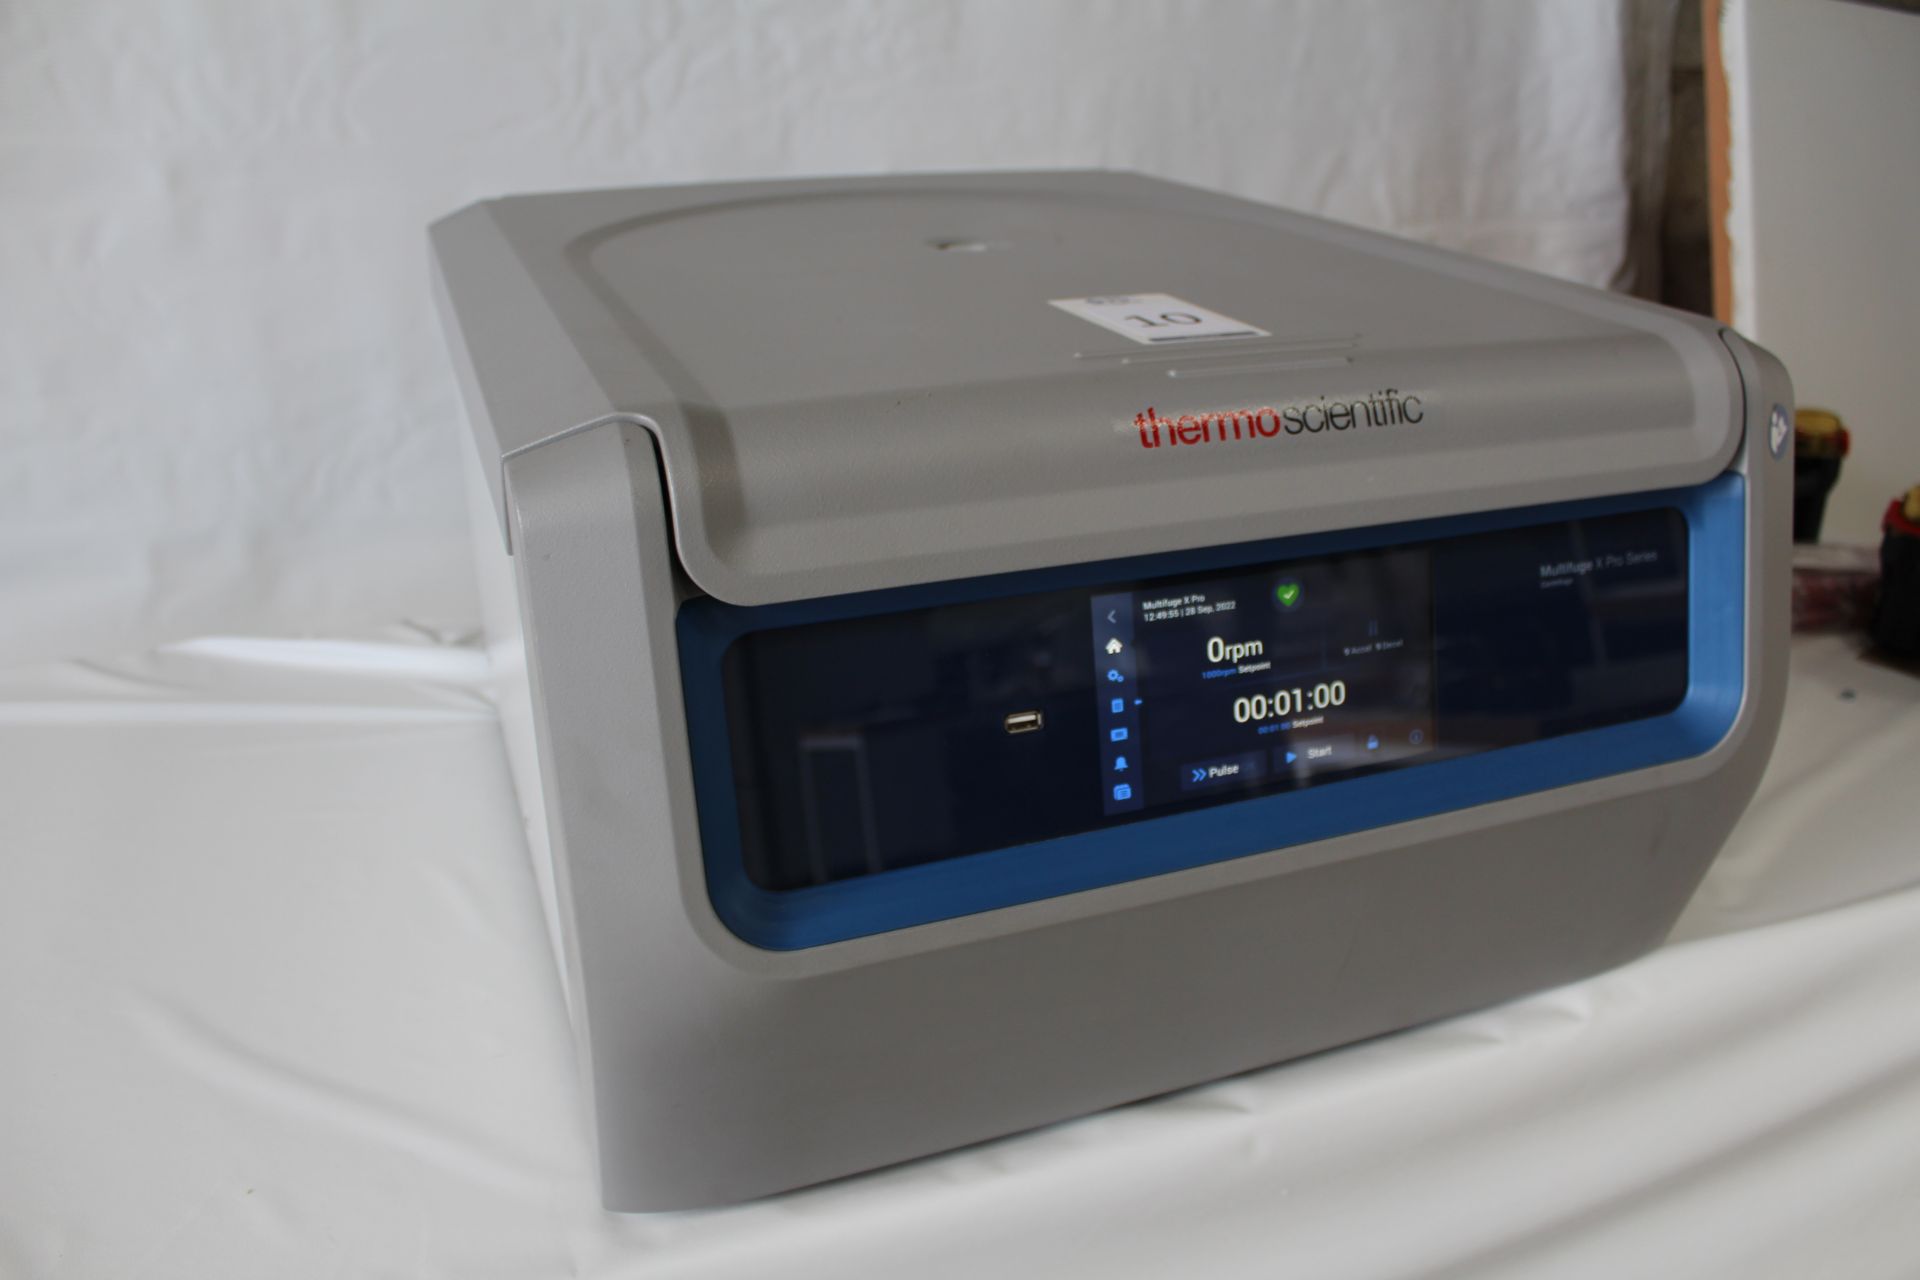 Thermo Scientific Multifuge X4pro Benchtop Centrifuge. SN# 42641218 (Location: Brentwood. Please